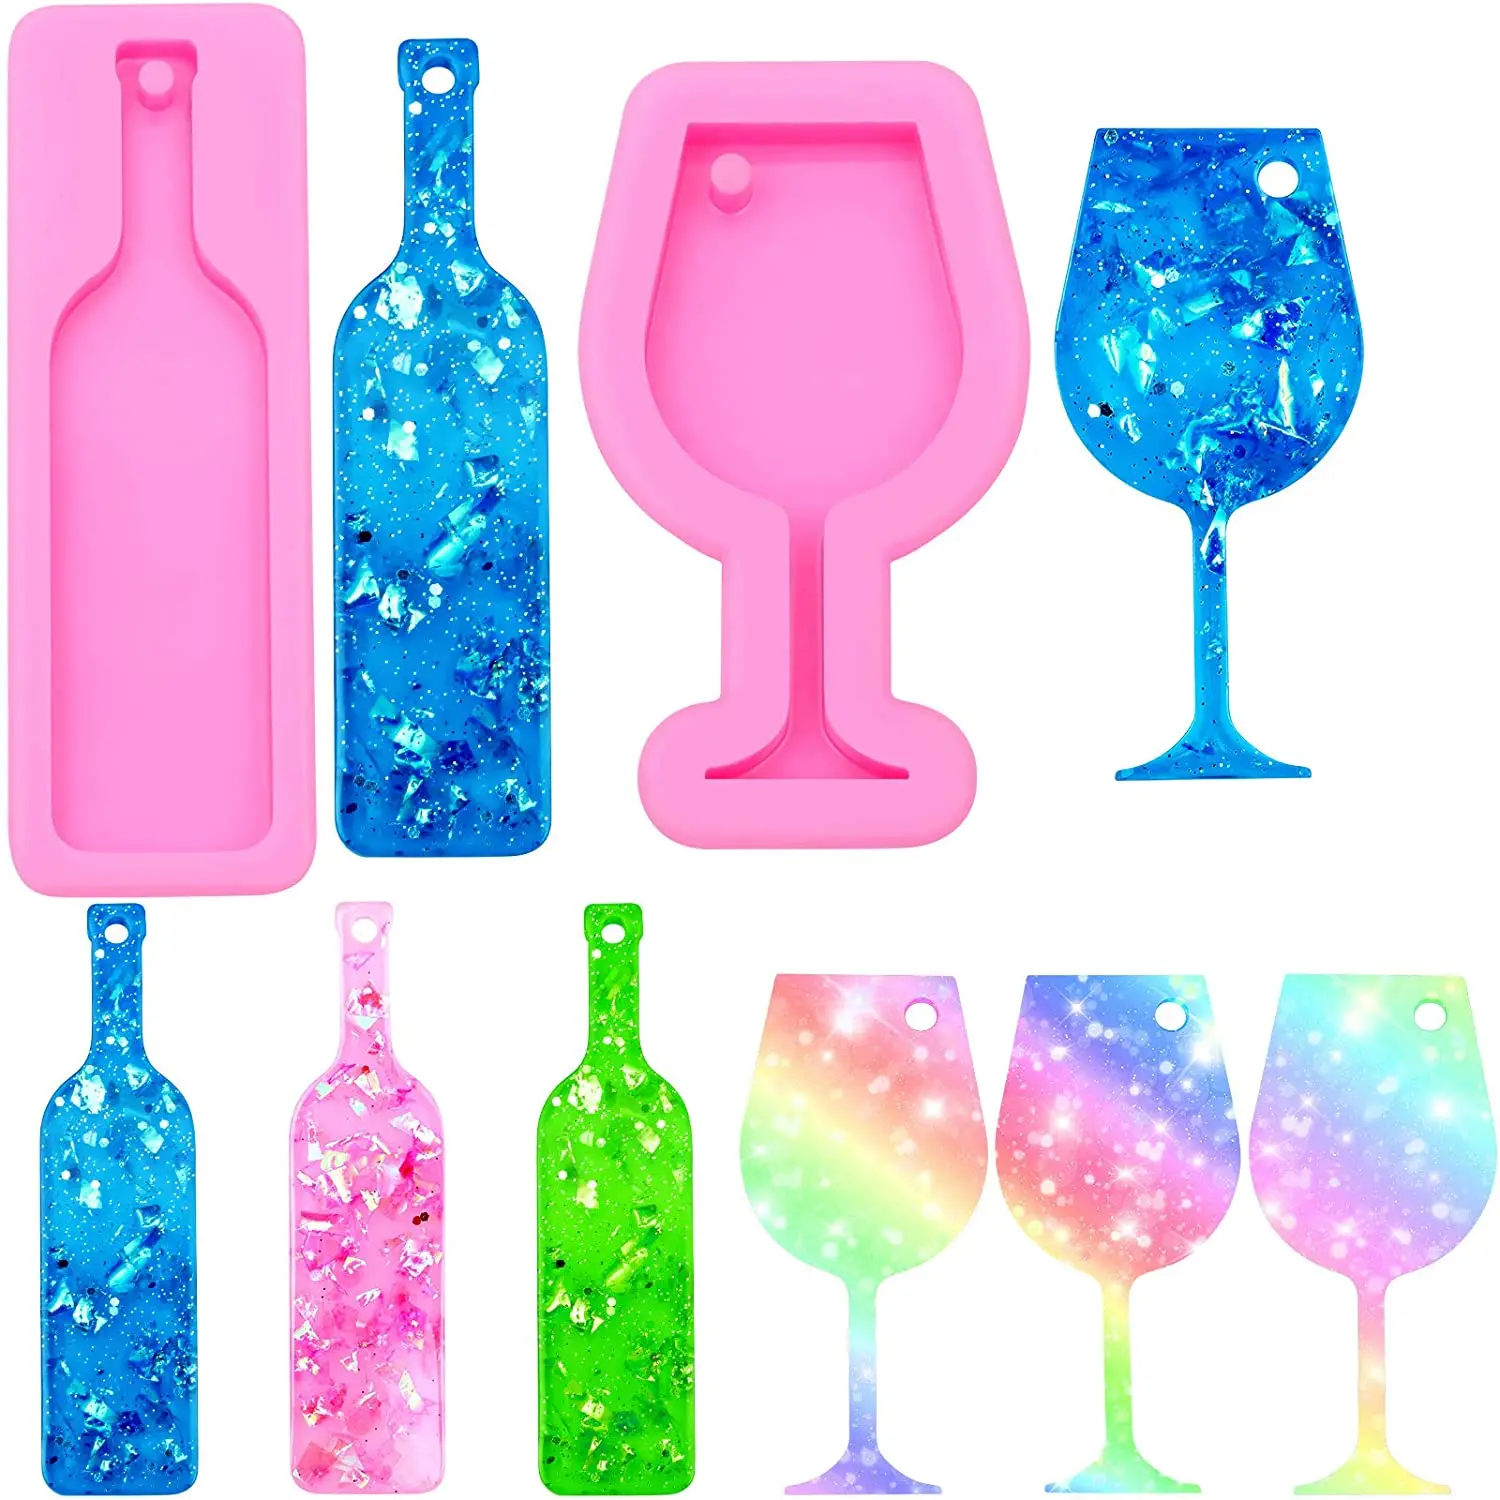 2Pcs Wine Bottle Mini Wine Glass Goblet Cup Keychain Silicone Mold with Hole for DIY Baking Crafting Cake Topper Decoration